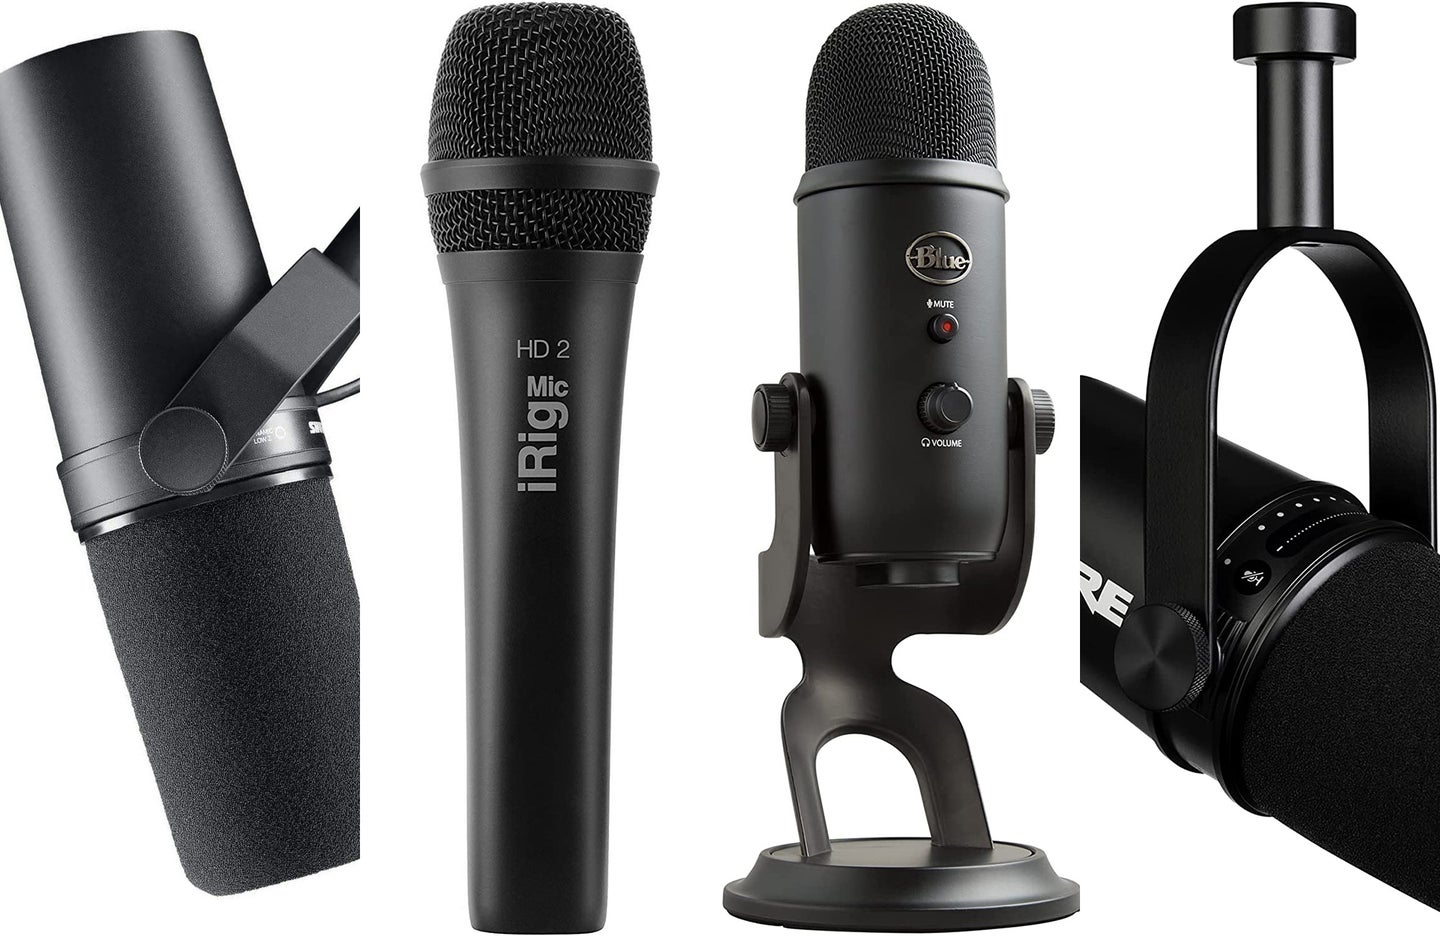 These are the best microphones for podcasting.